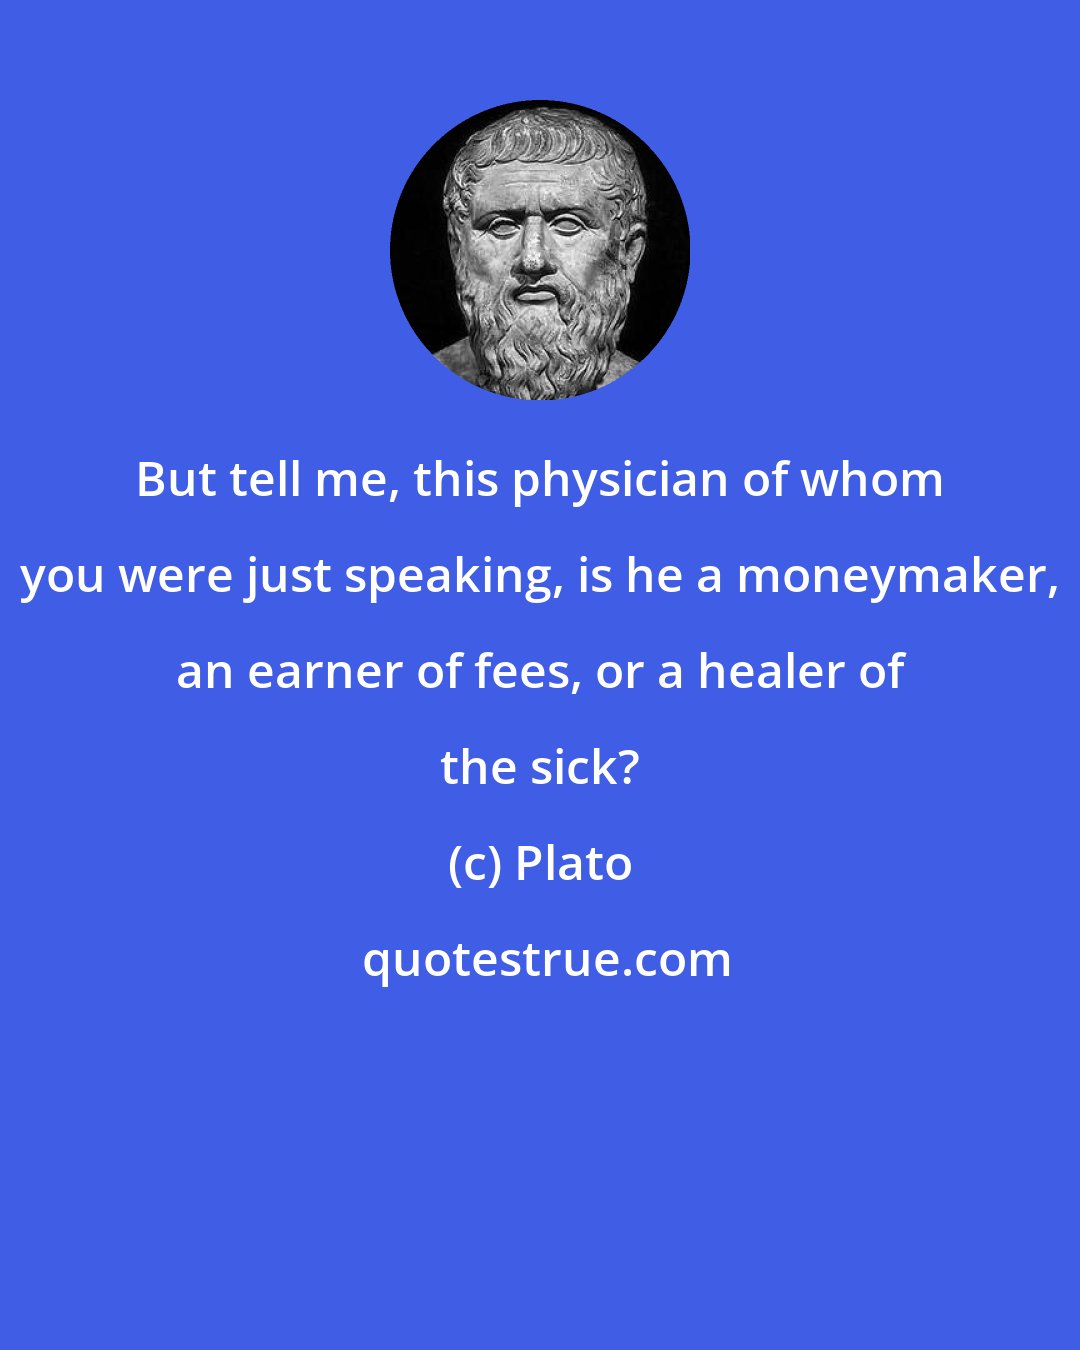 Plato: But tell me, this physician of whom you were just speaking, is he a moneymaker, an earner of fees, or a healer of the sick?